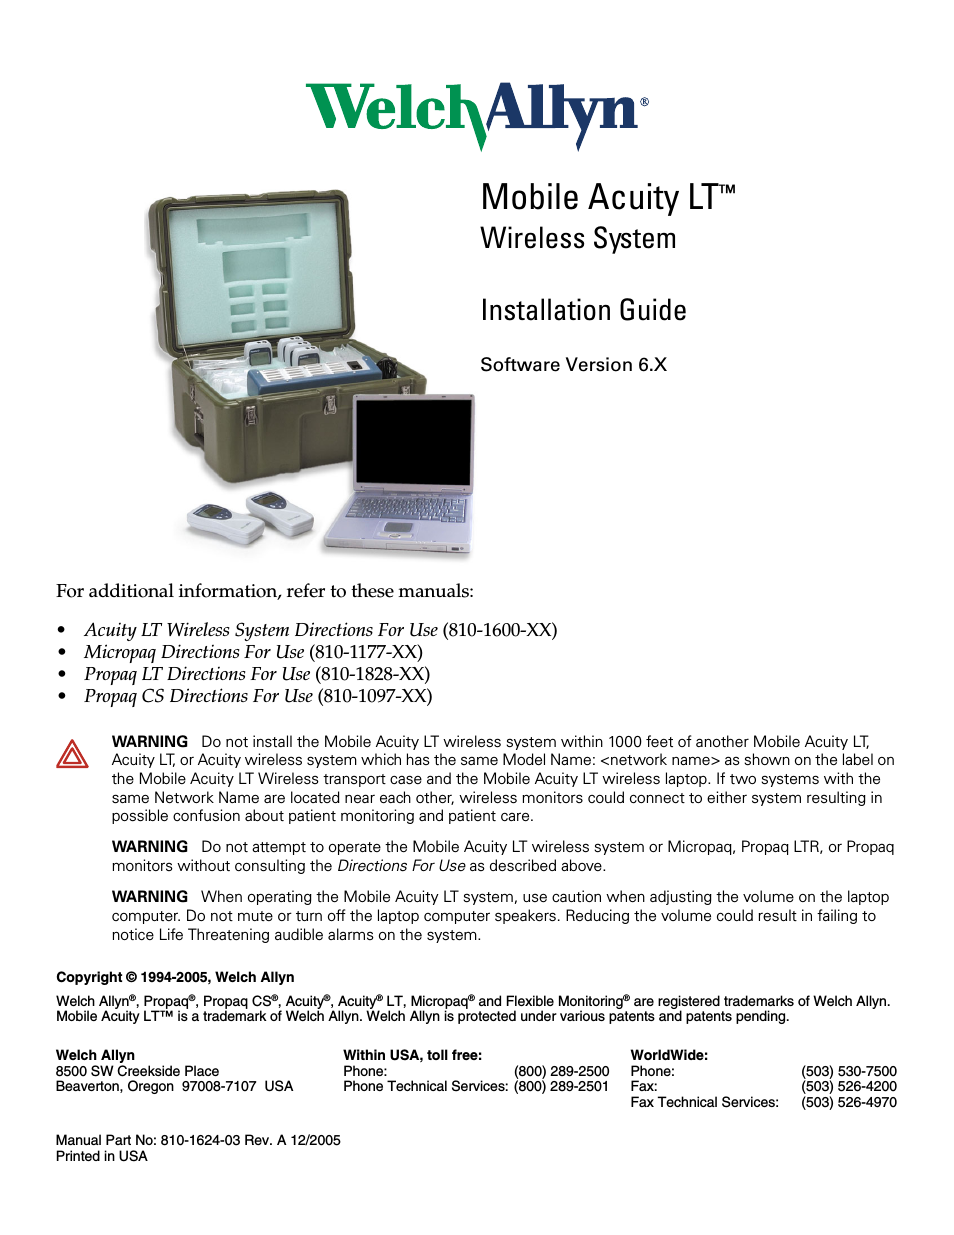 Acuity Mobile LT Central Station 810-1624-03A - Installation Guide